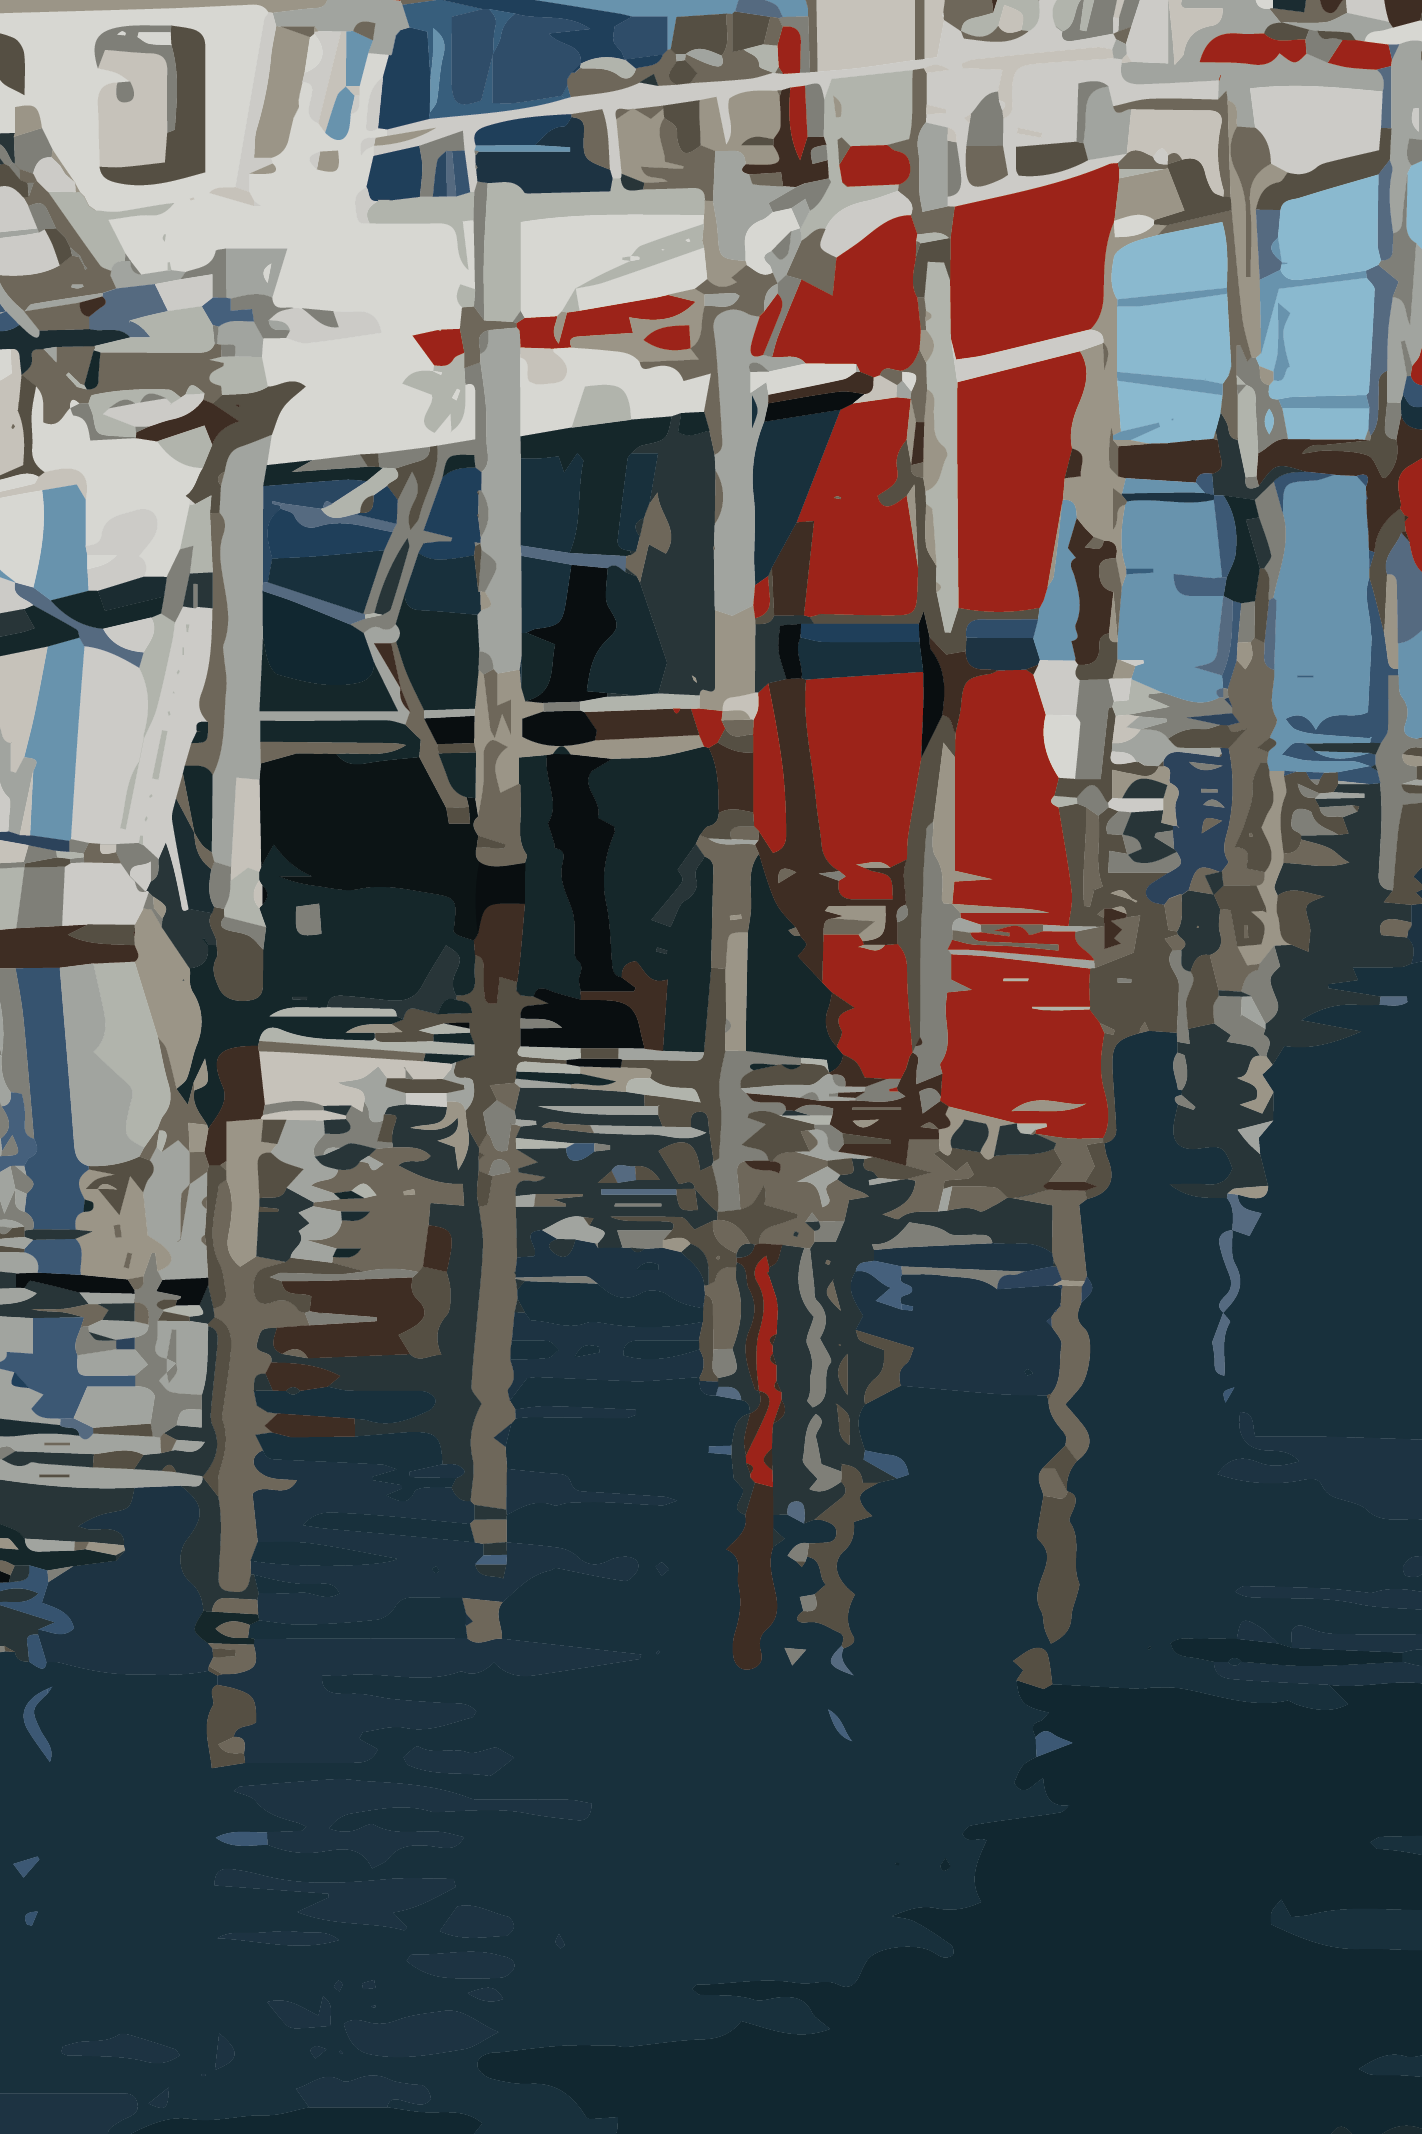 Skagen harbour reflections, photography and illustration by Xavier Wendling.